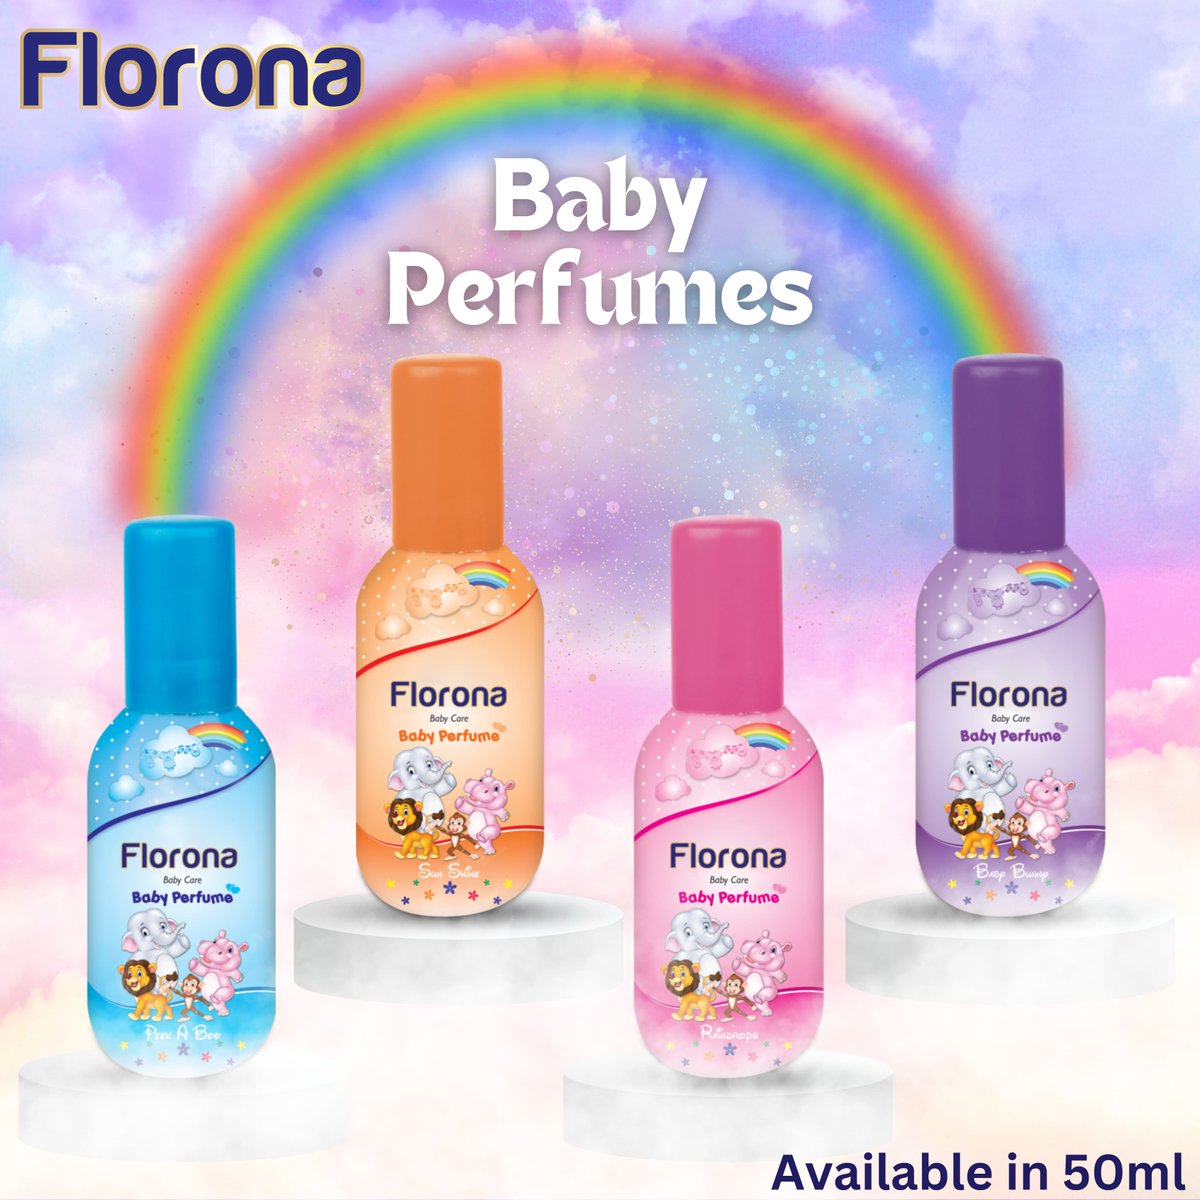 FLORONA Baby Perfume: A delicate scent for your little one's sweet moments. Pure, gentle, and simply irresistible.
Available in 50ml

#onestlimited #onest #onestbrands #branding #florona #kiddos #baby #babyperfume #perfume #fragrance #babyperfumes #fmcg #exporter